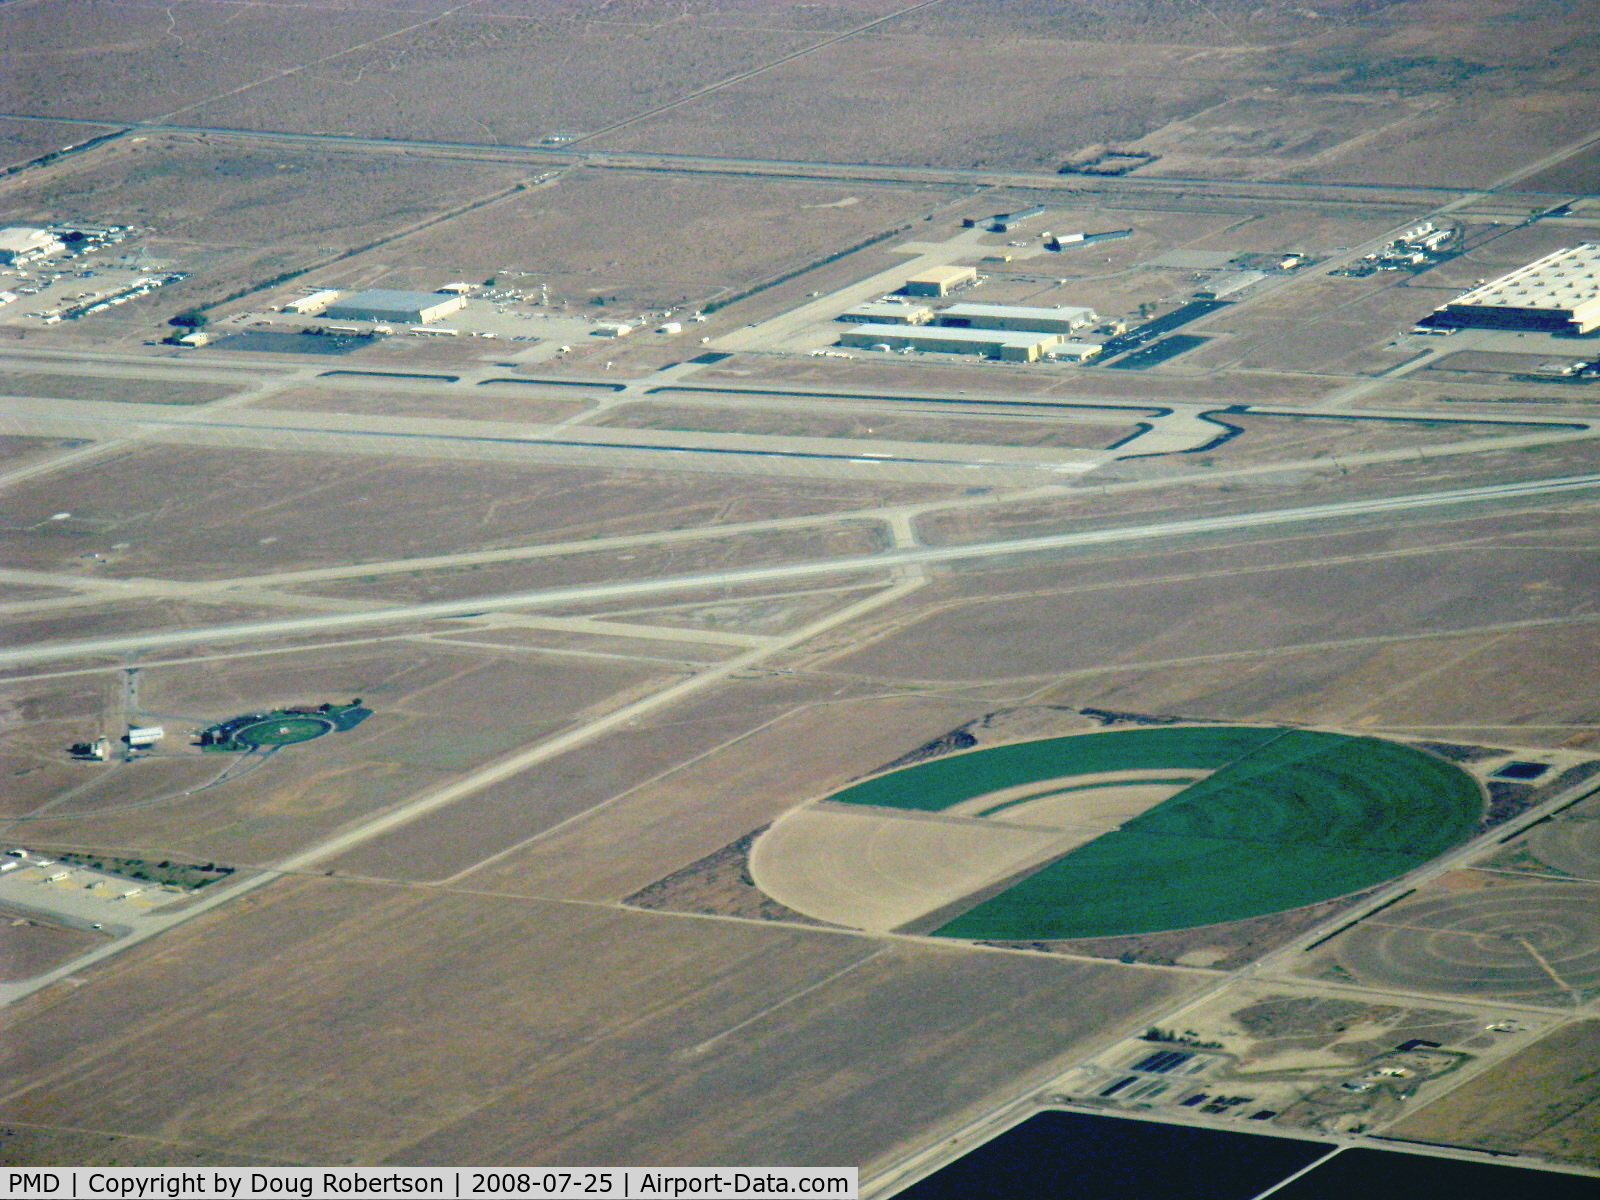 Palmdale Usaf Plant 42 Airport (PMD) - Palmdale Regional-USAF Plant 42 from 11,500' msl enroute to OSH 